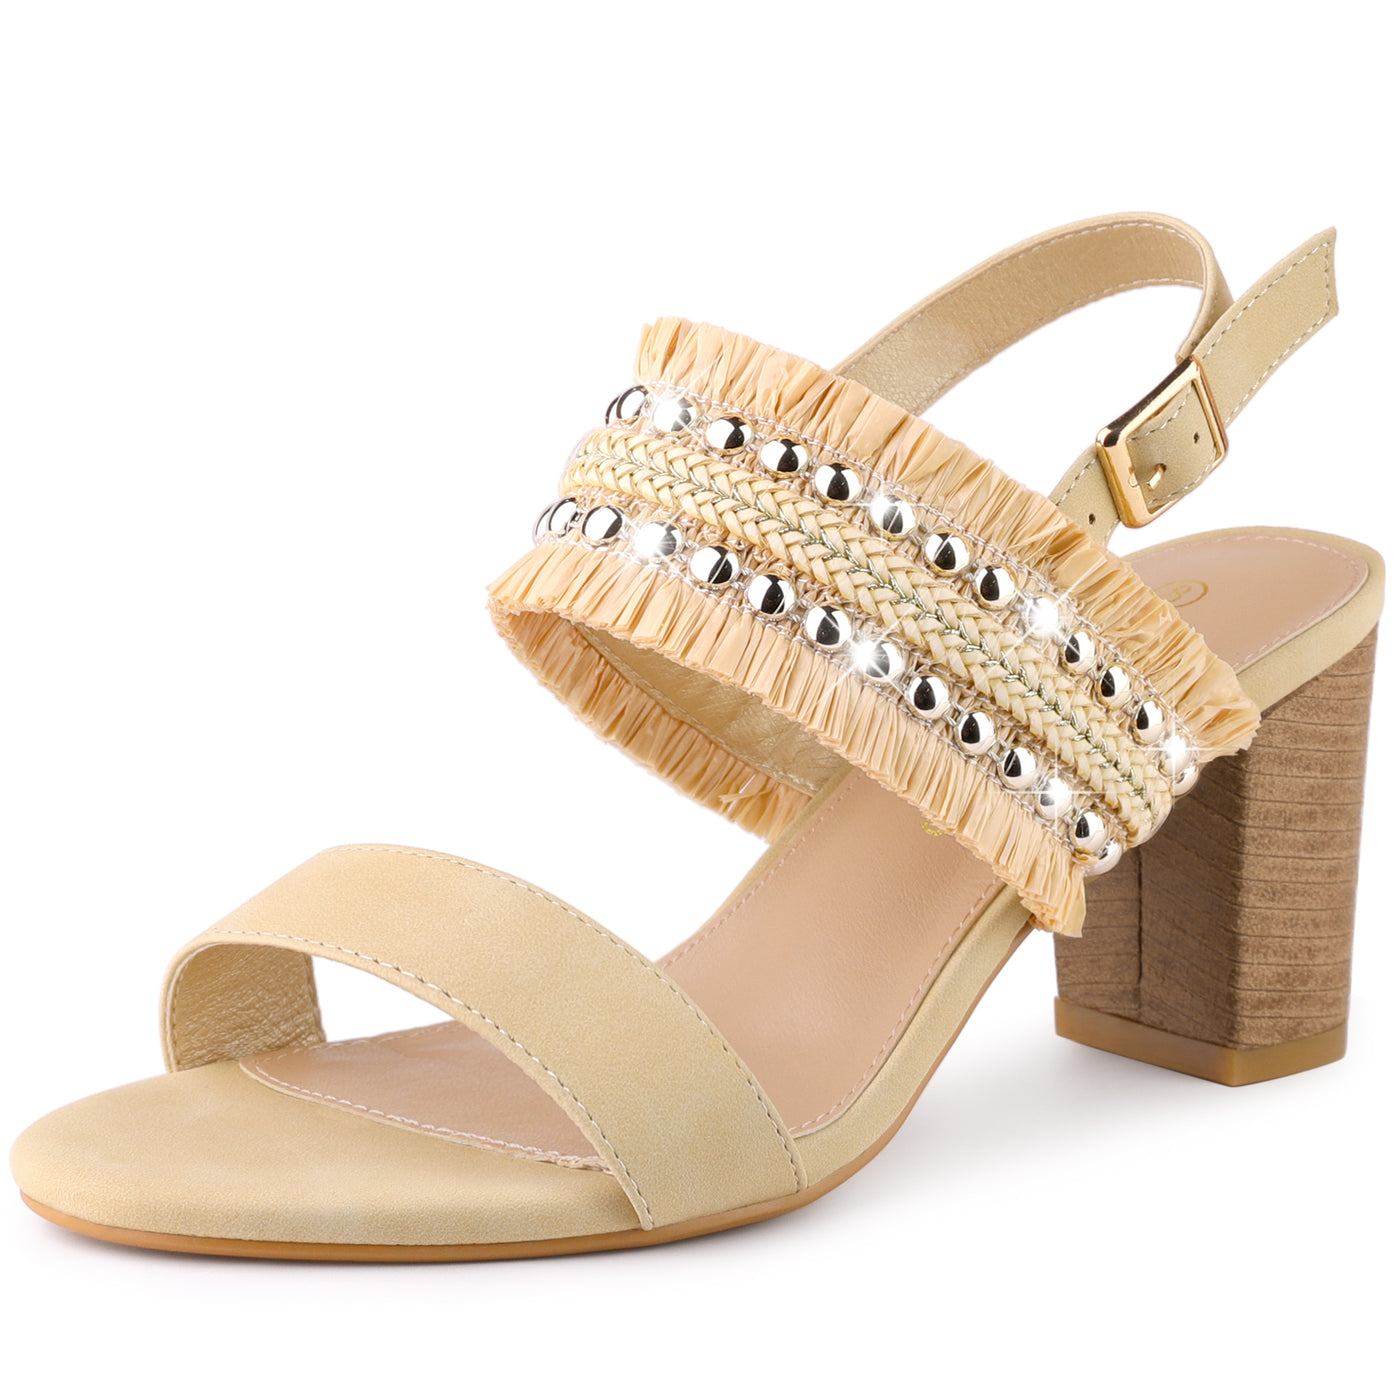 Allegra K Women's Ankle Strap Chunky Heels Sandals, Sandals for Woman Embellished Braided Beads